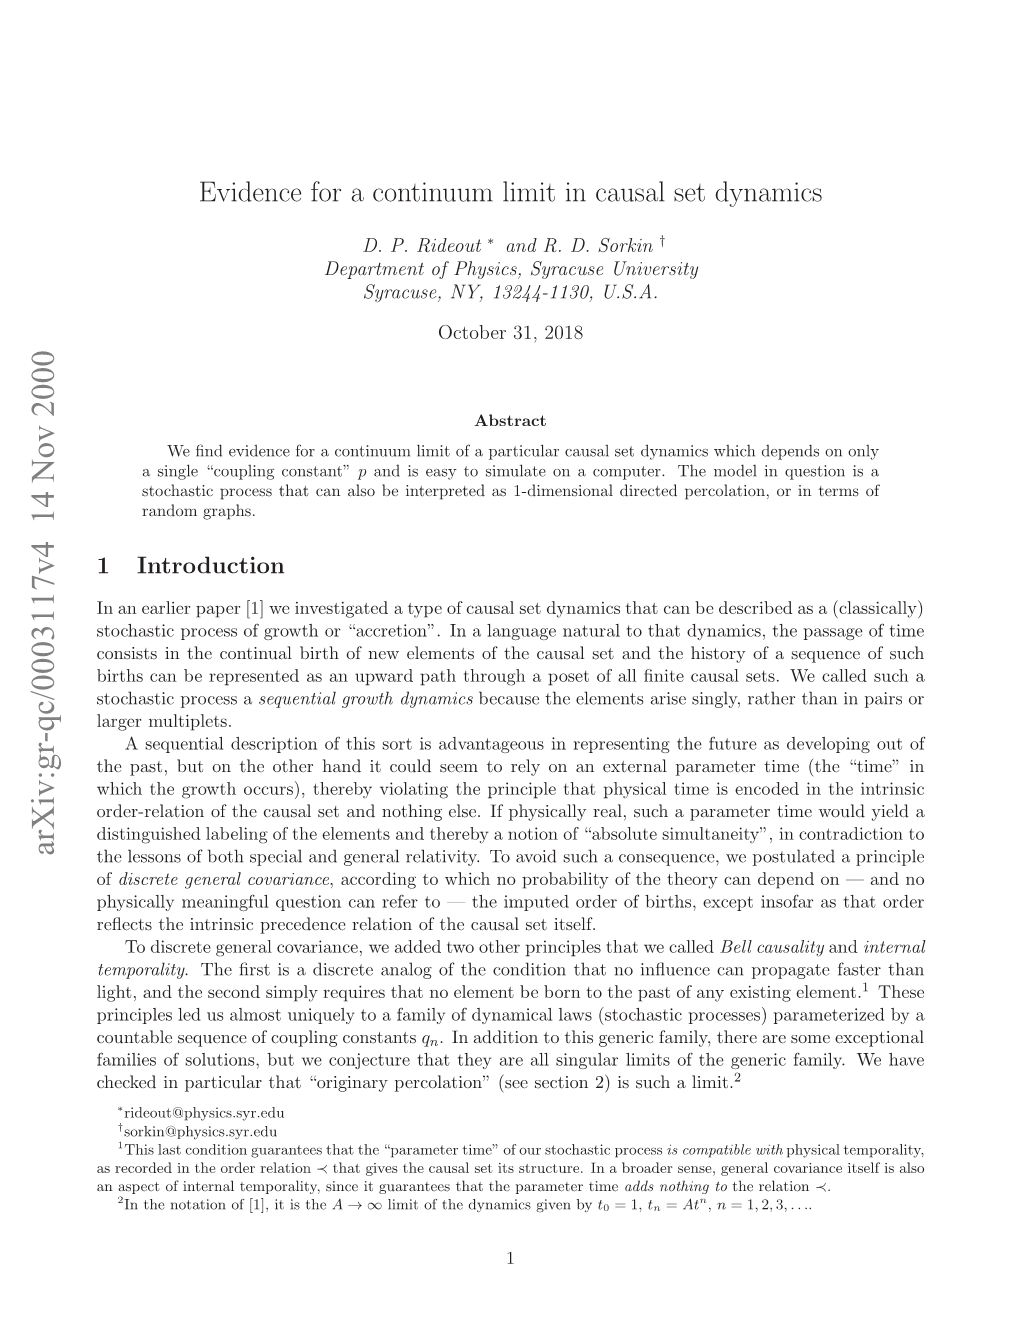 Evidence for a Continuum Limit in Causal Set Dynamics